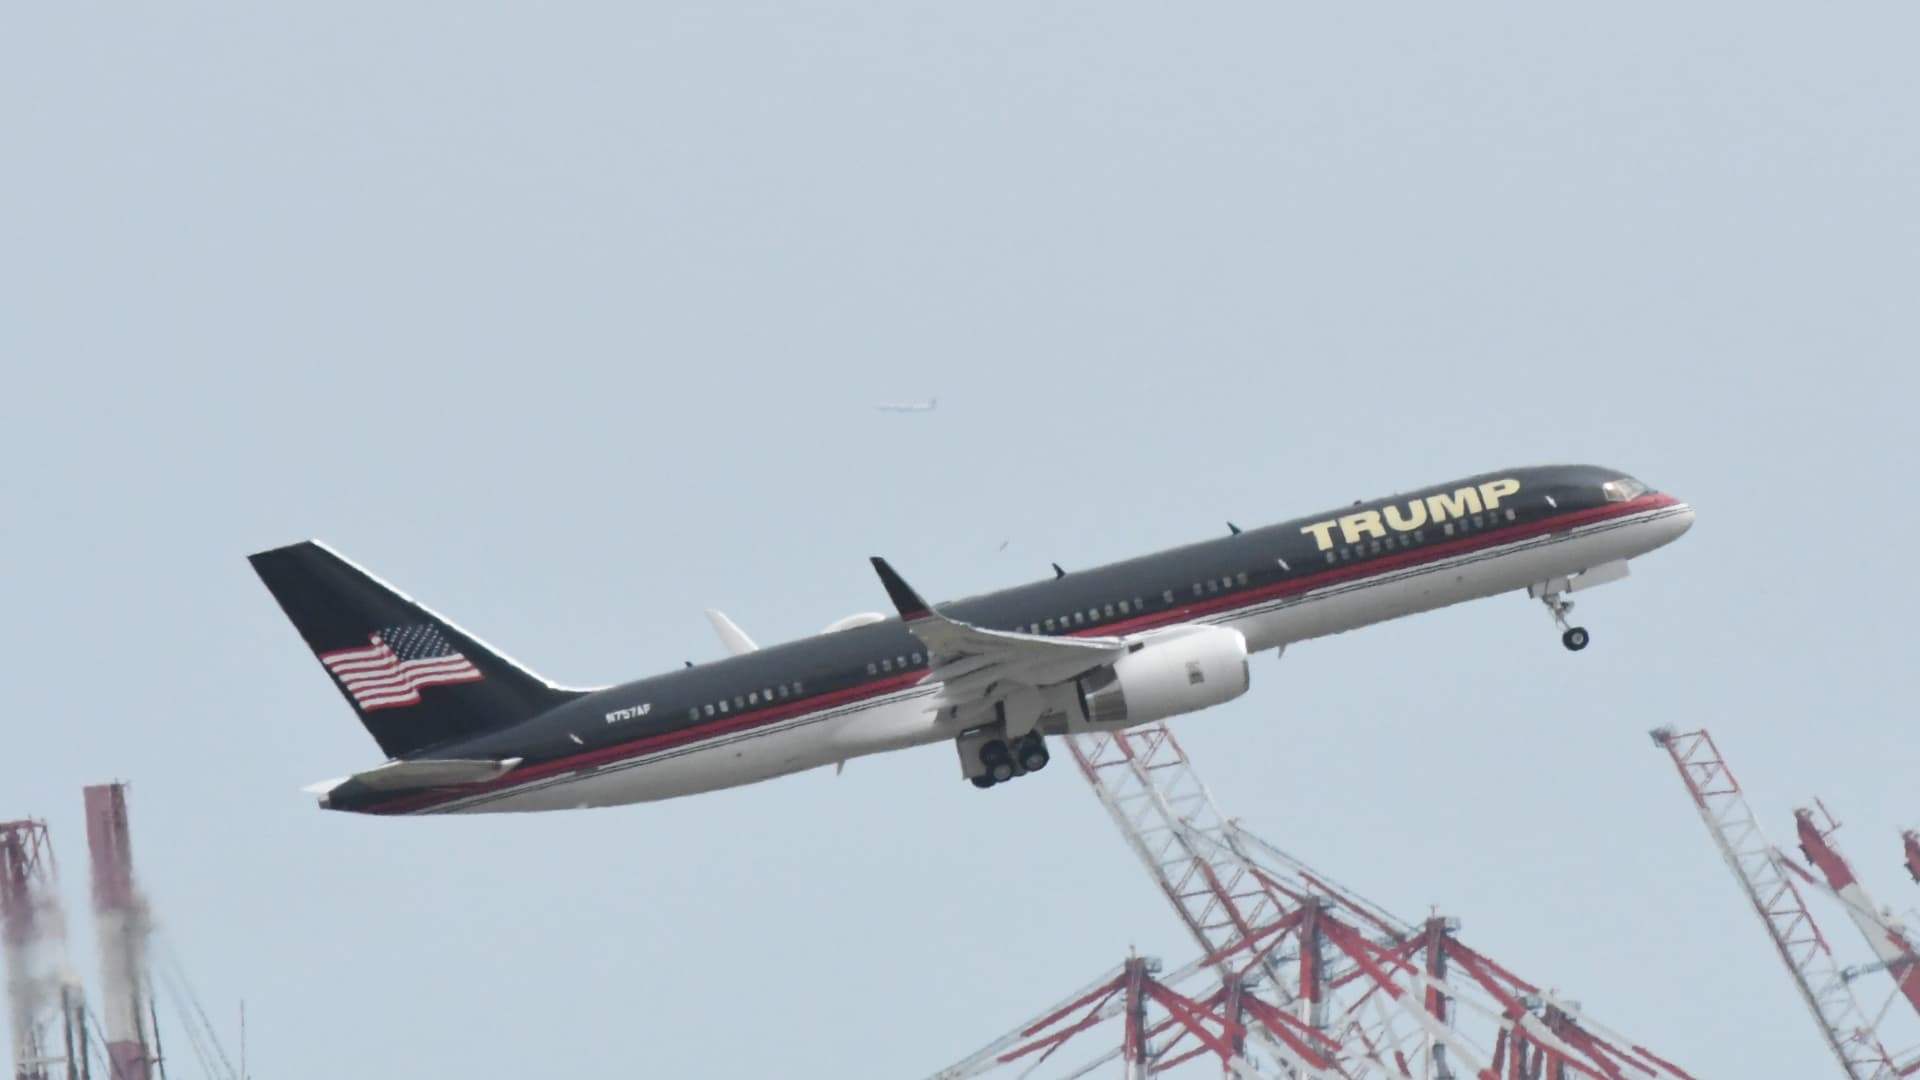 Former U.S. President Donald Trump's airplane takes off from Newark airport on August 3, 2023 in New York City.